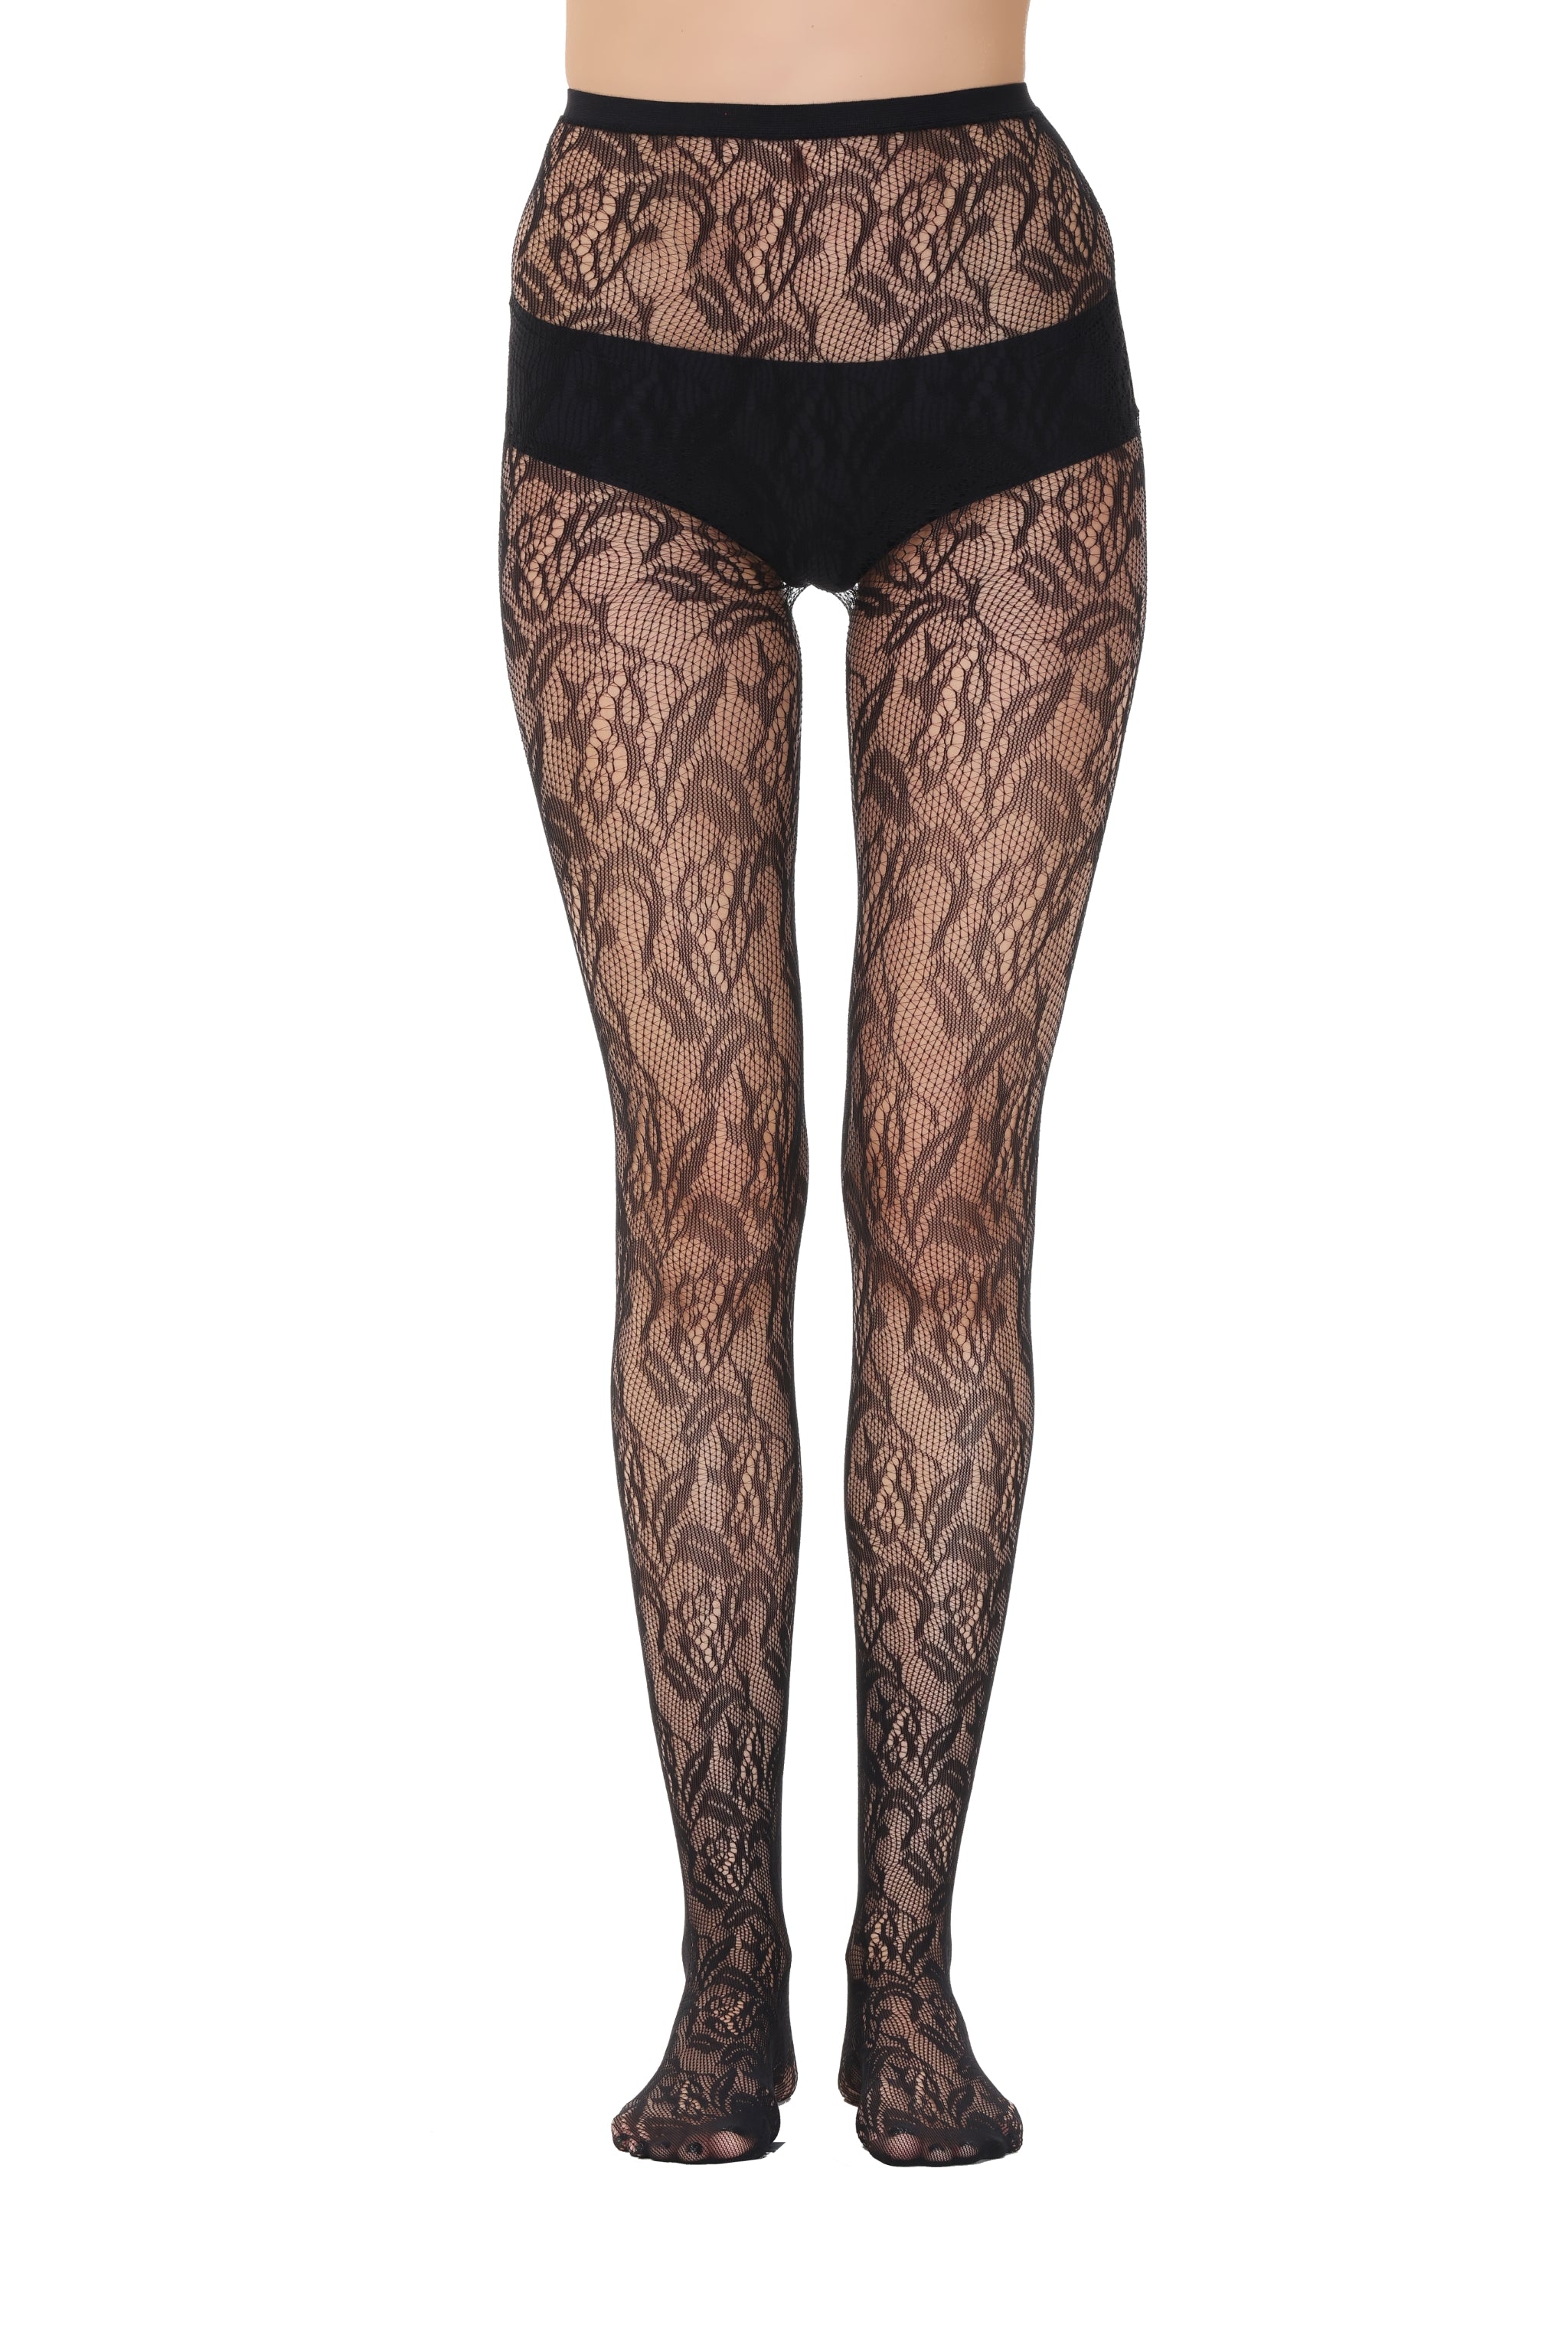 Fishnet Tights 110959 Front